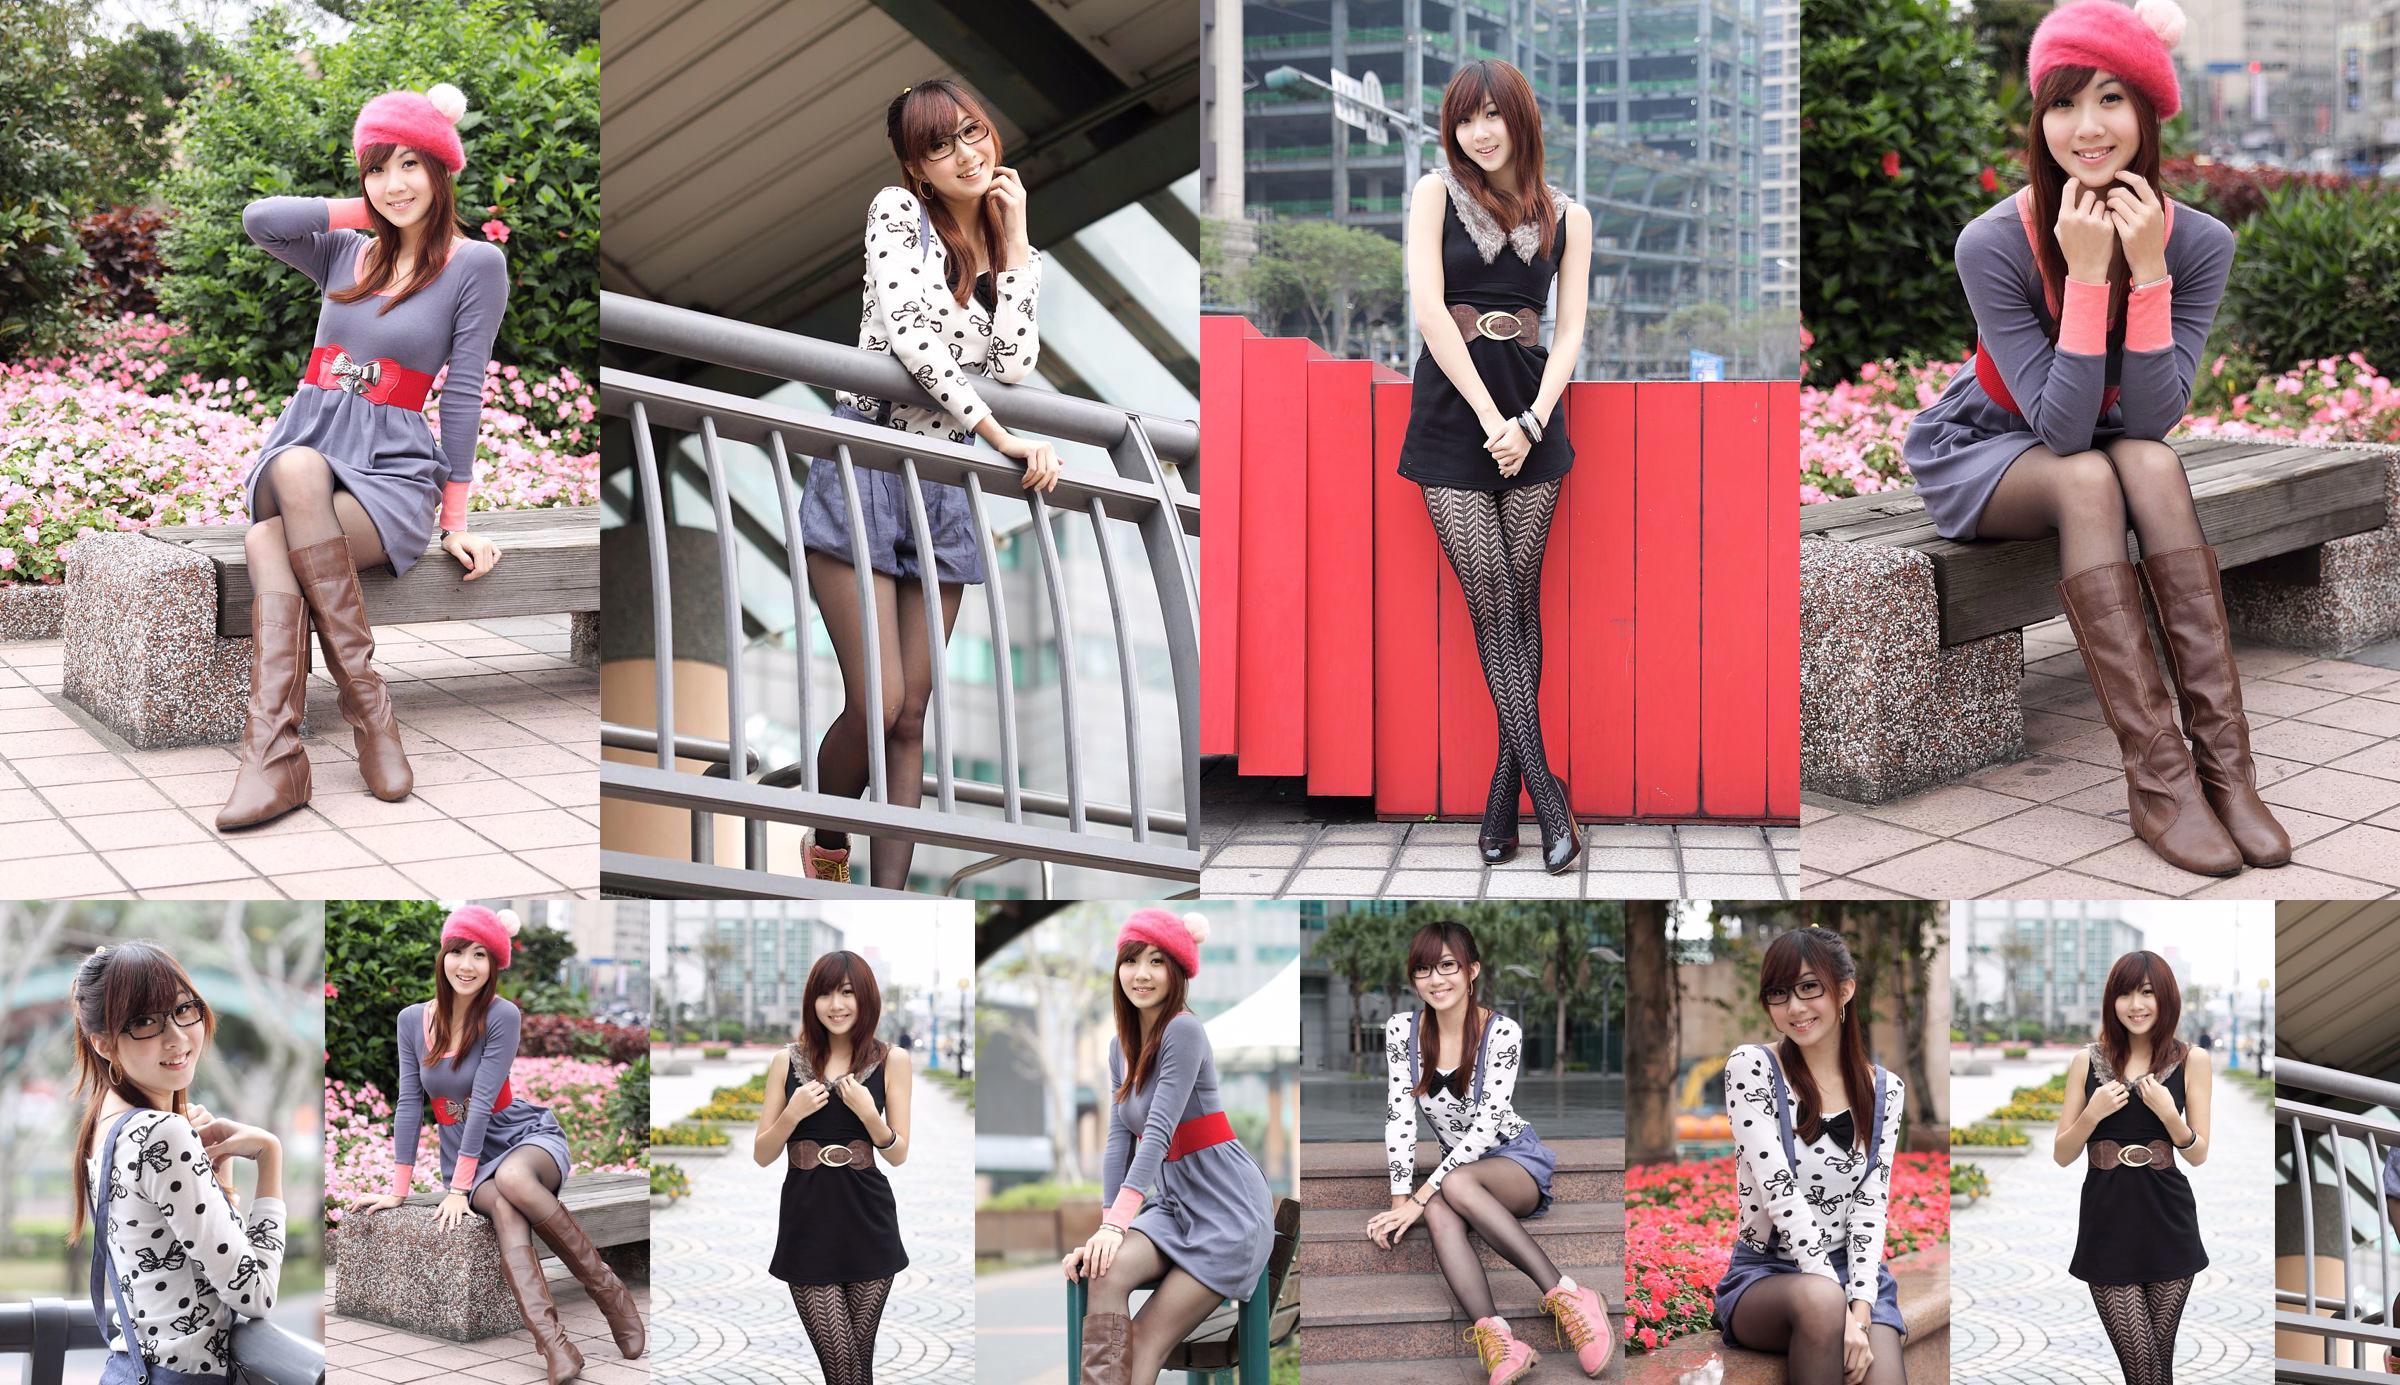 Photo Collection of Taiwan's Pure Beauty Angel "Black Silk Street Photographs" No.7ffa4f Page 1